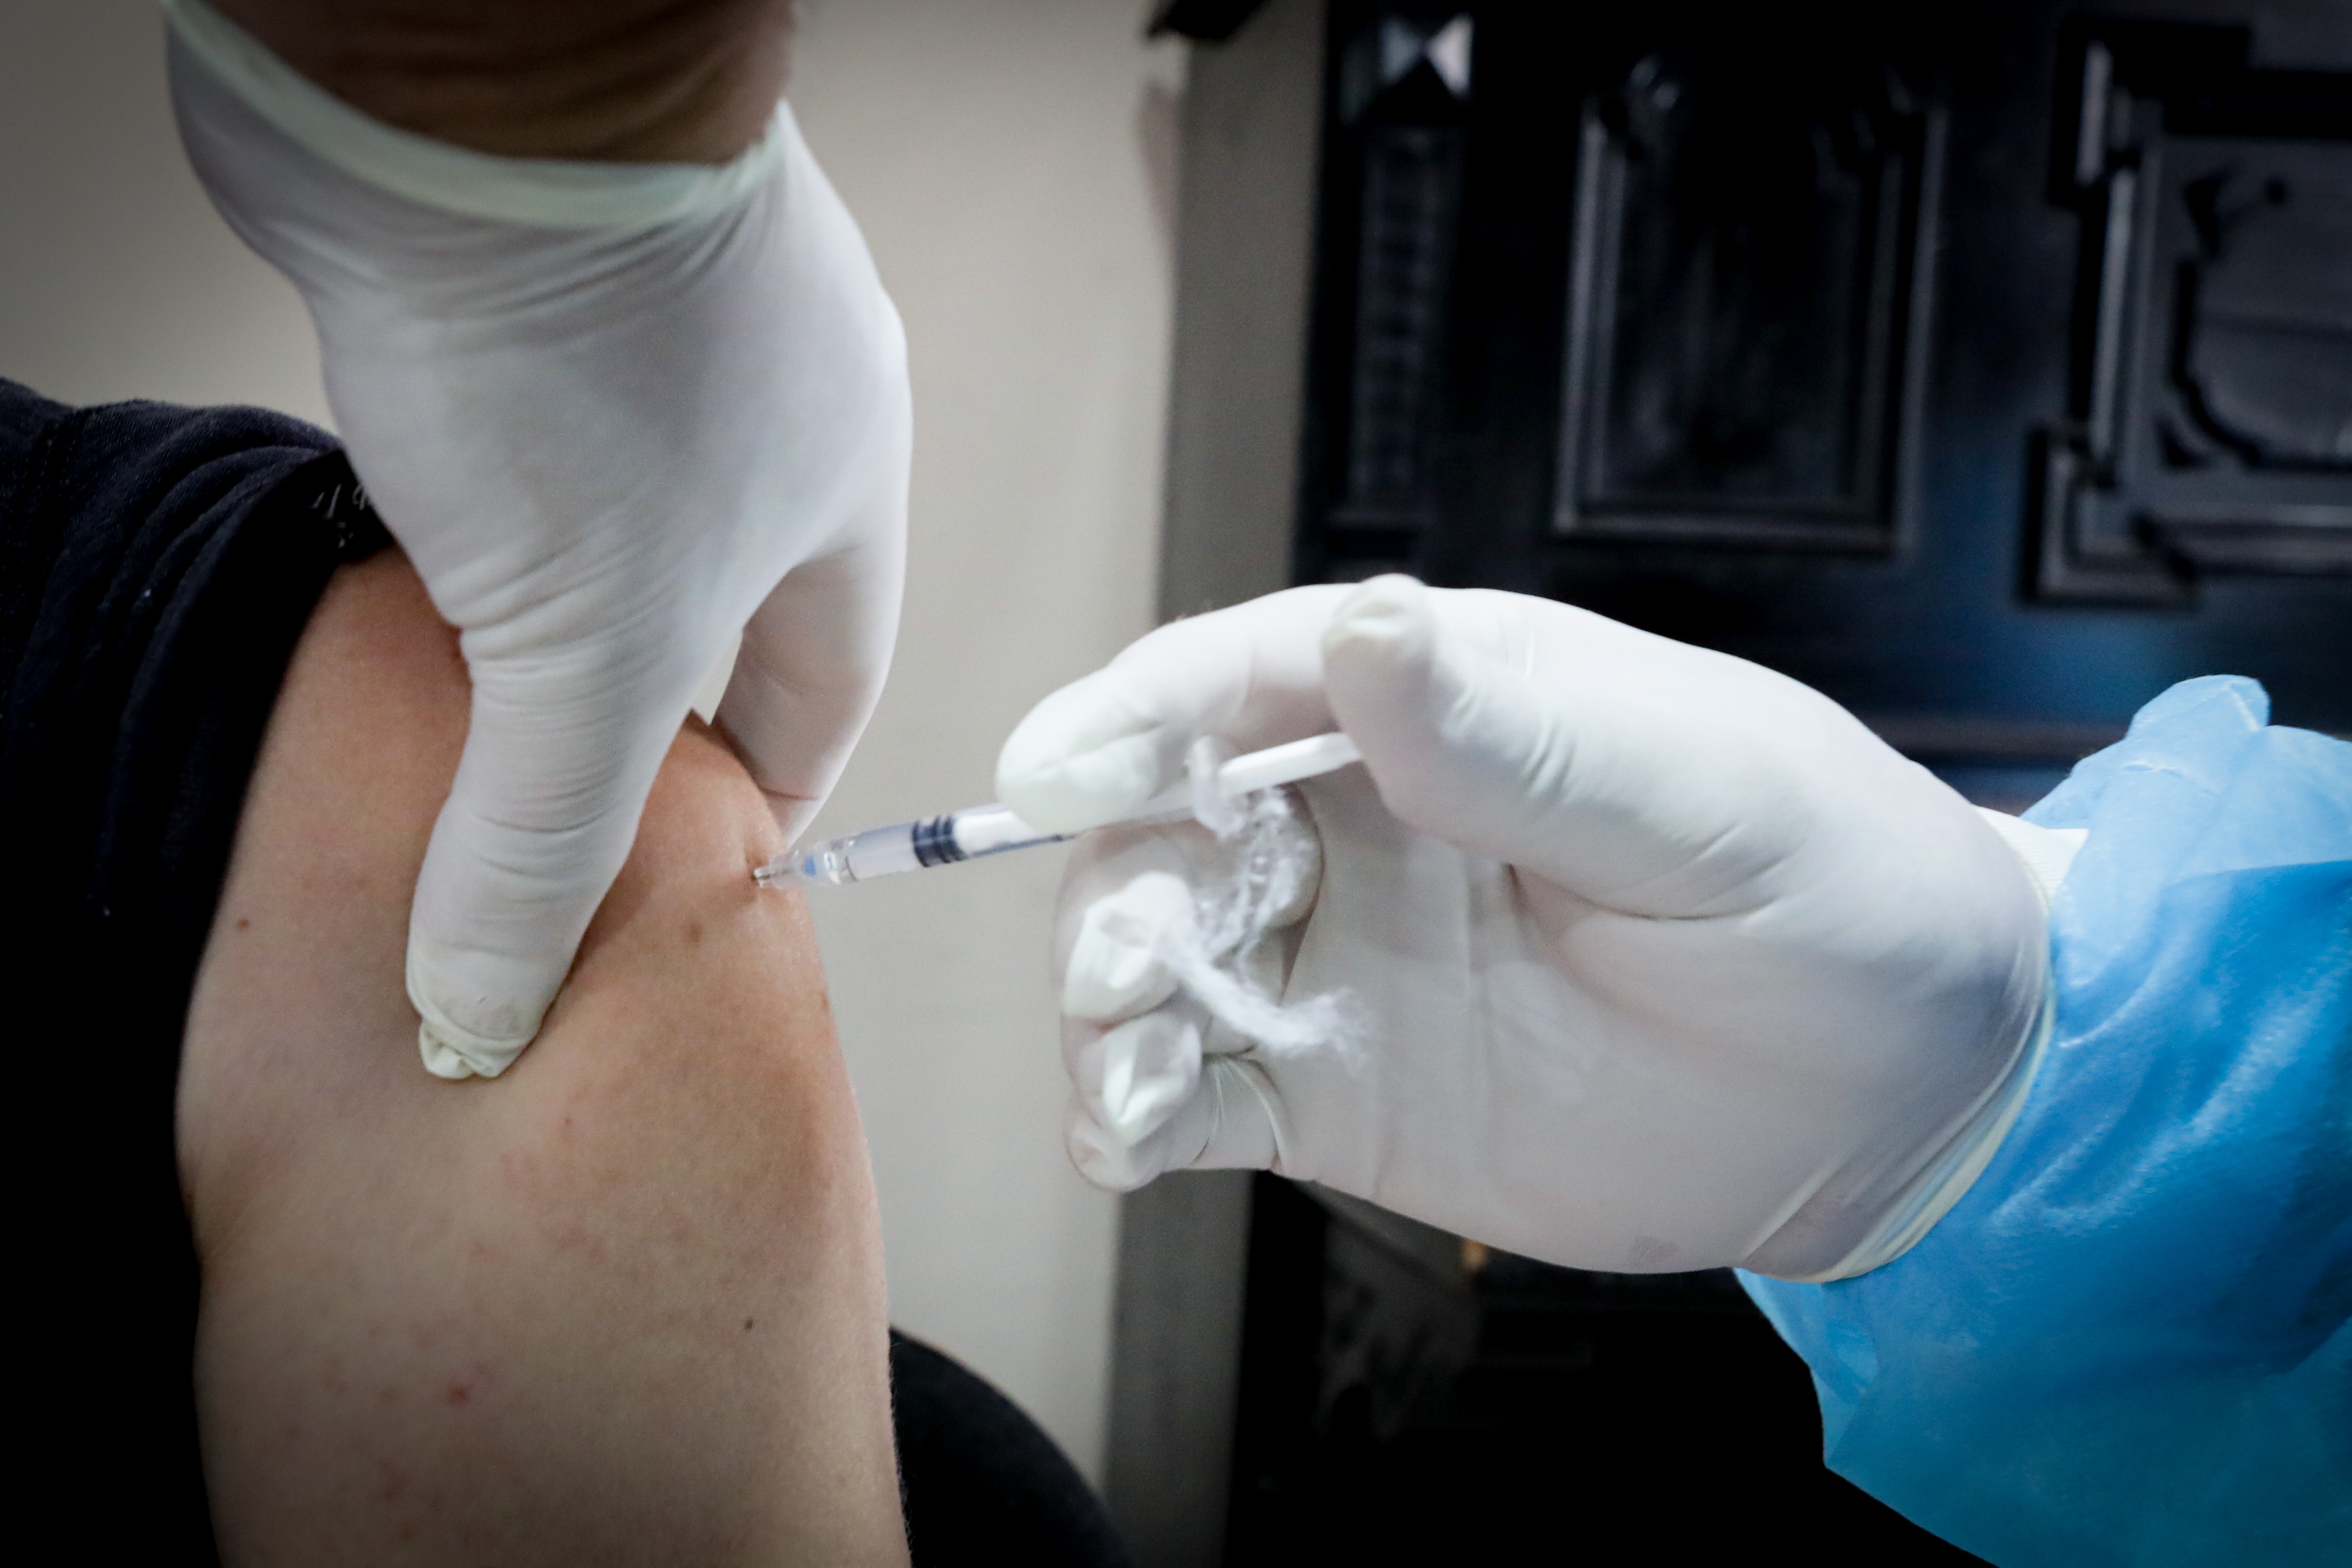 The authorities emphasized the importance of vaccination to avoid serious illness and death due to COVID / (EFE).